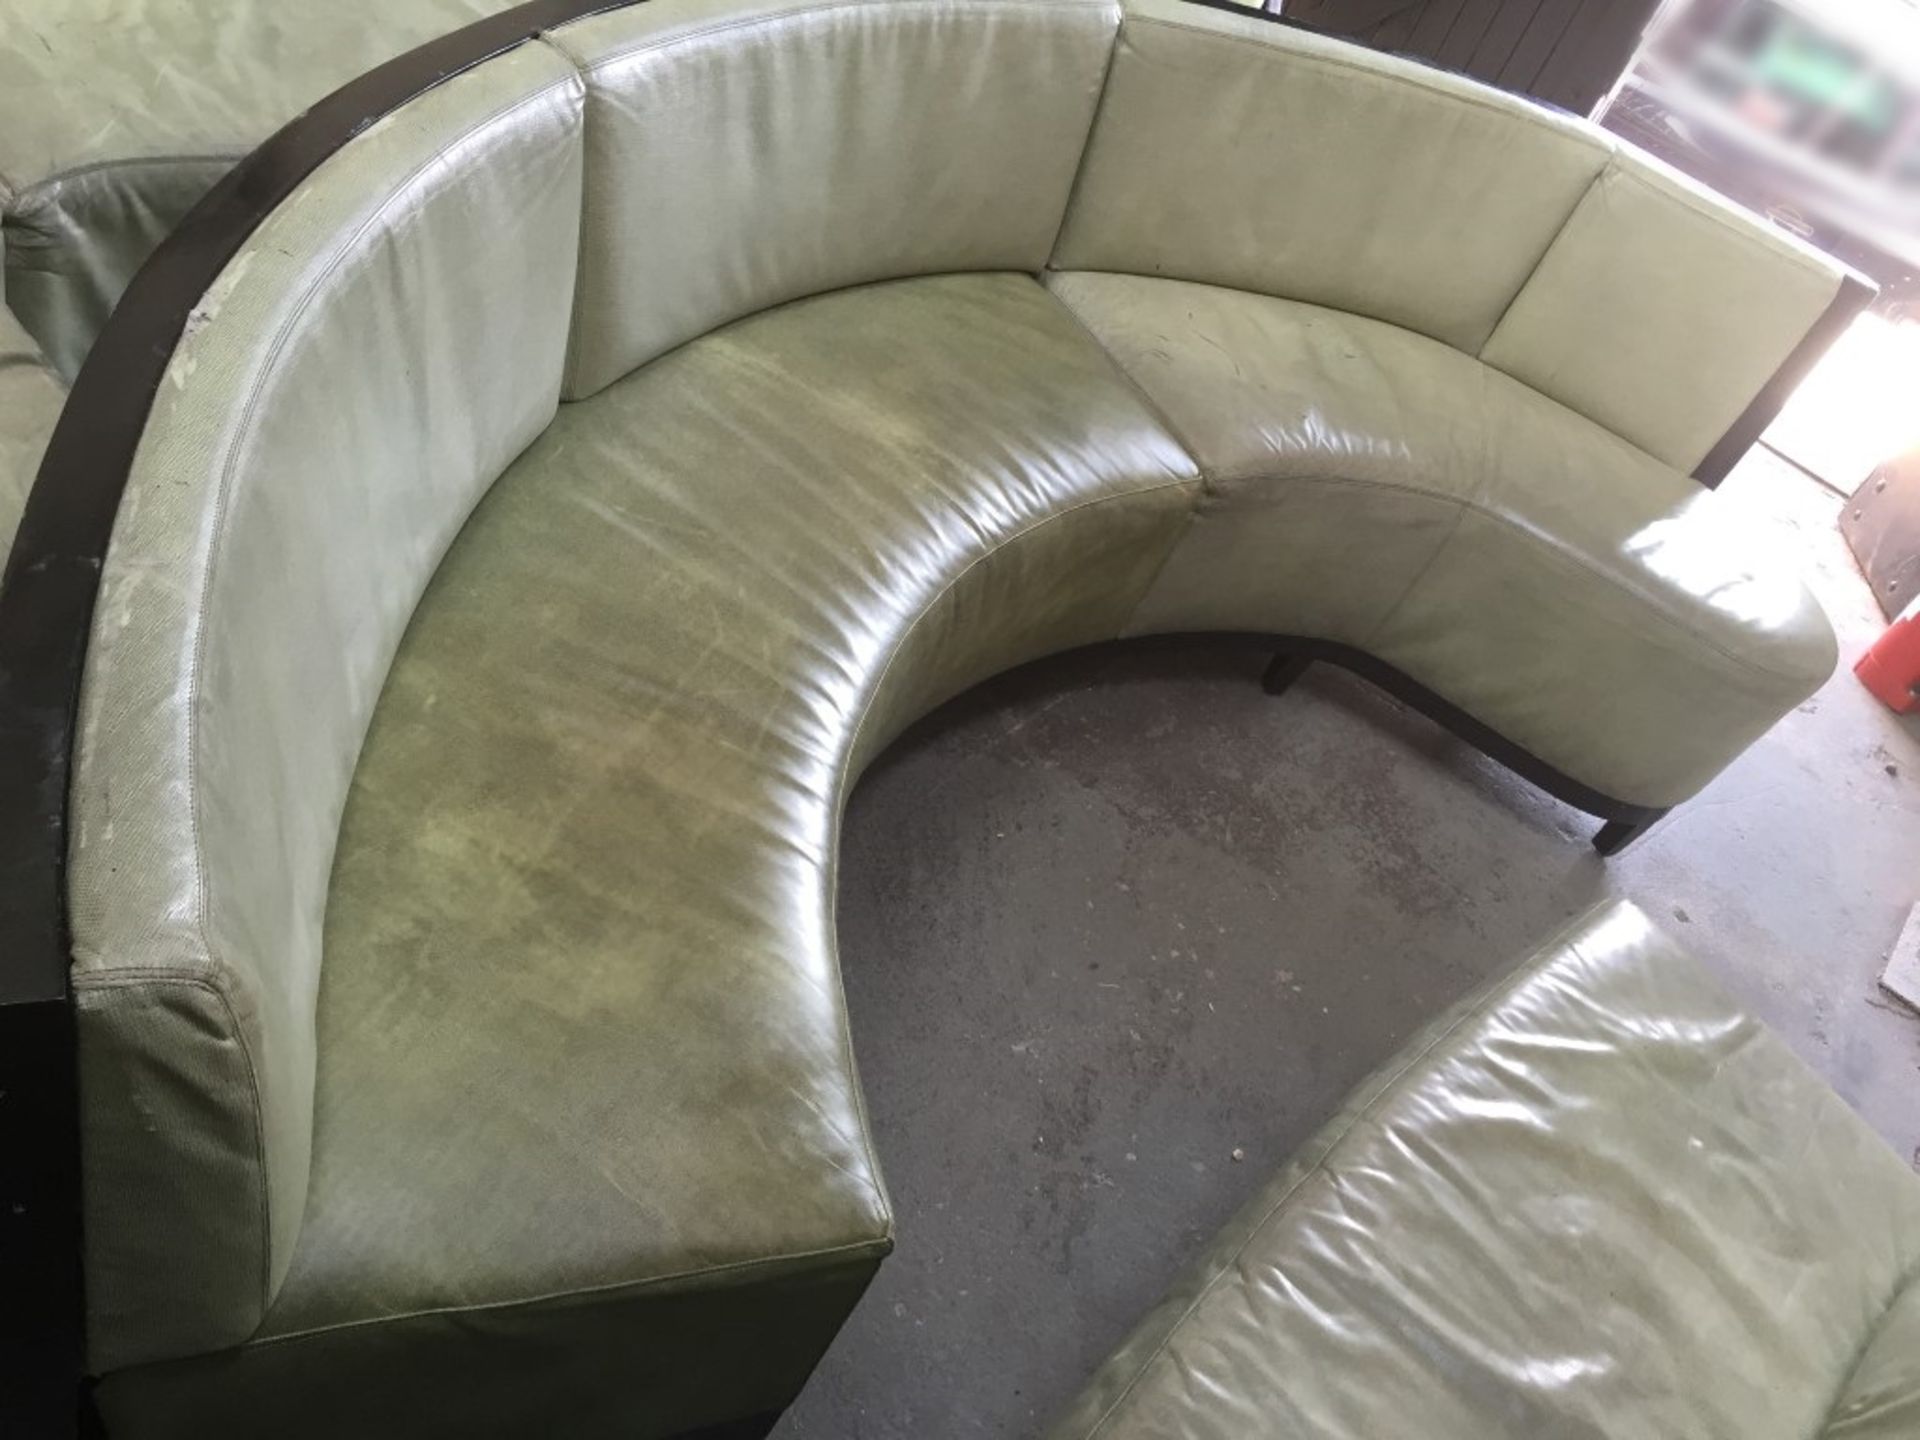 1 x Luxury Upholstered Curved Seating Area - Recently Removed From Nobu - Dimensions: W285 x D62cm x - Image 4 of 23